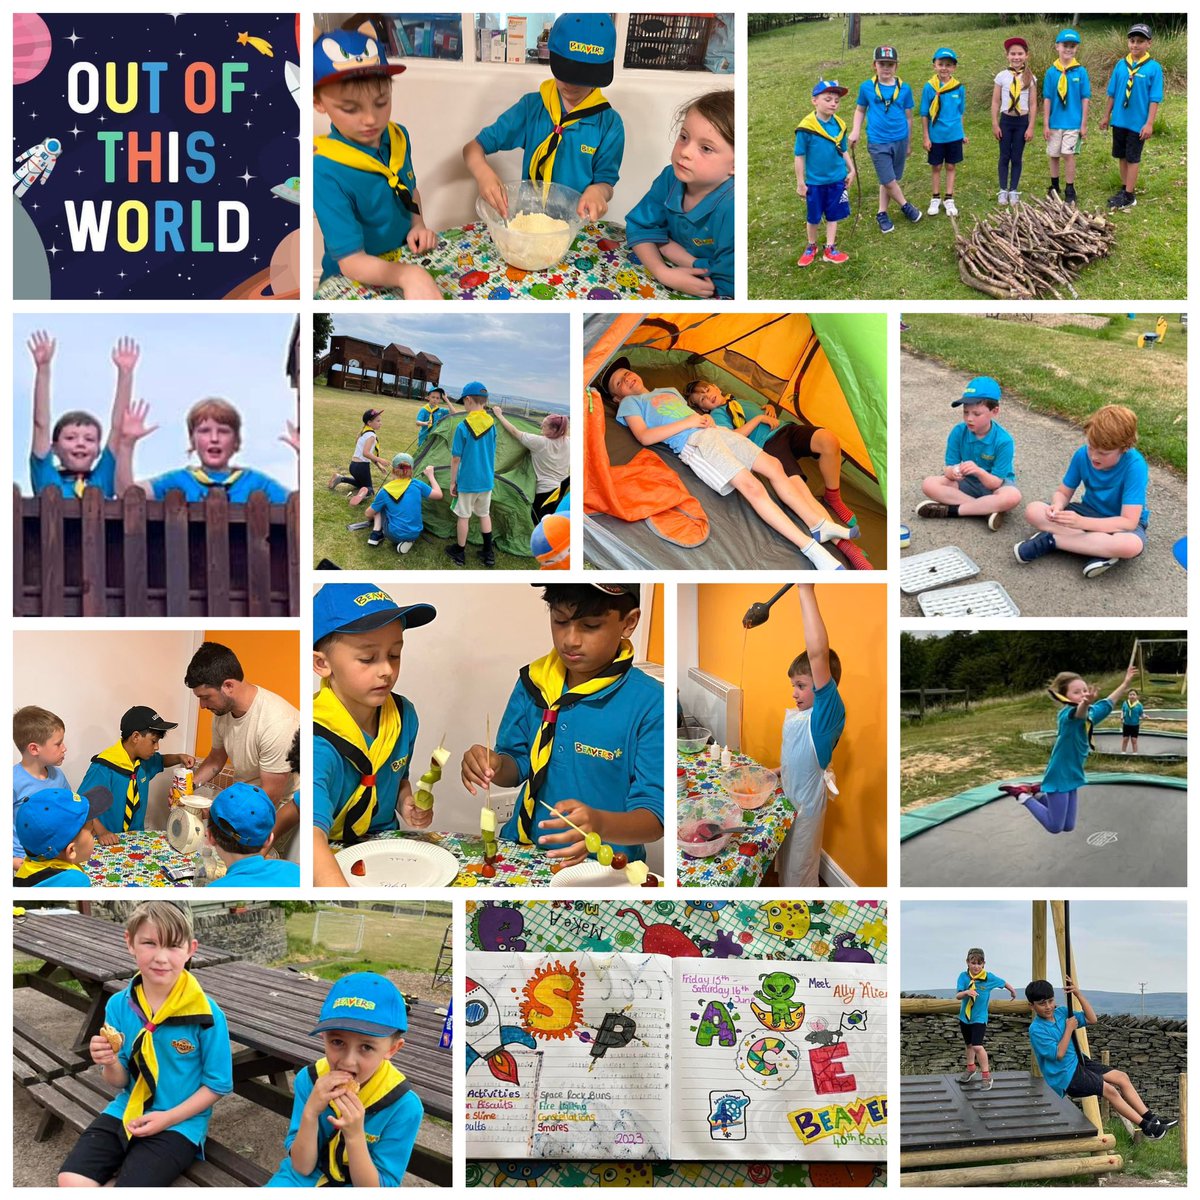 Our first Beaver #sleepover was #OutOfThisWorld! Space themed - we made asteroid launchers, space slime, constellation cups, Mars rovers, moon biscuits, lit fires, toasted marshmallows, pitched tents - and much more! @scouts @GMNScouts #Rochdale @RCMH1 #Adventure